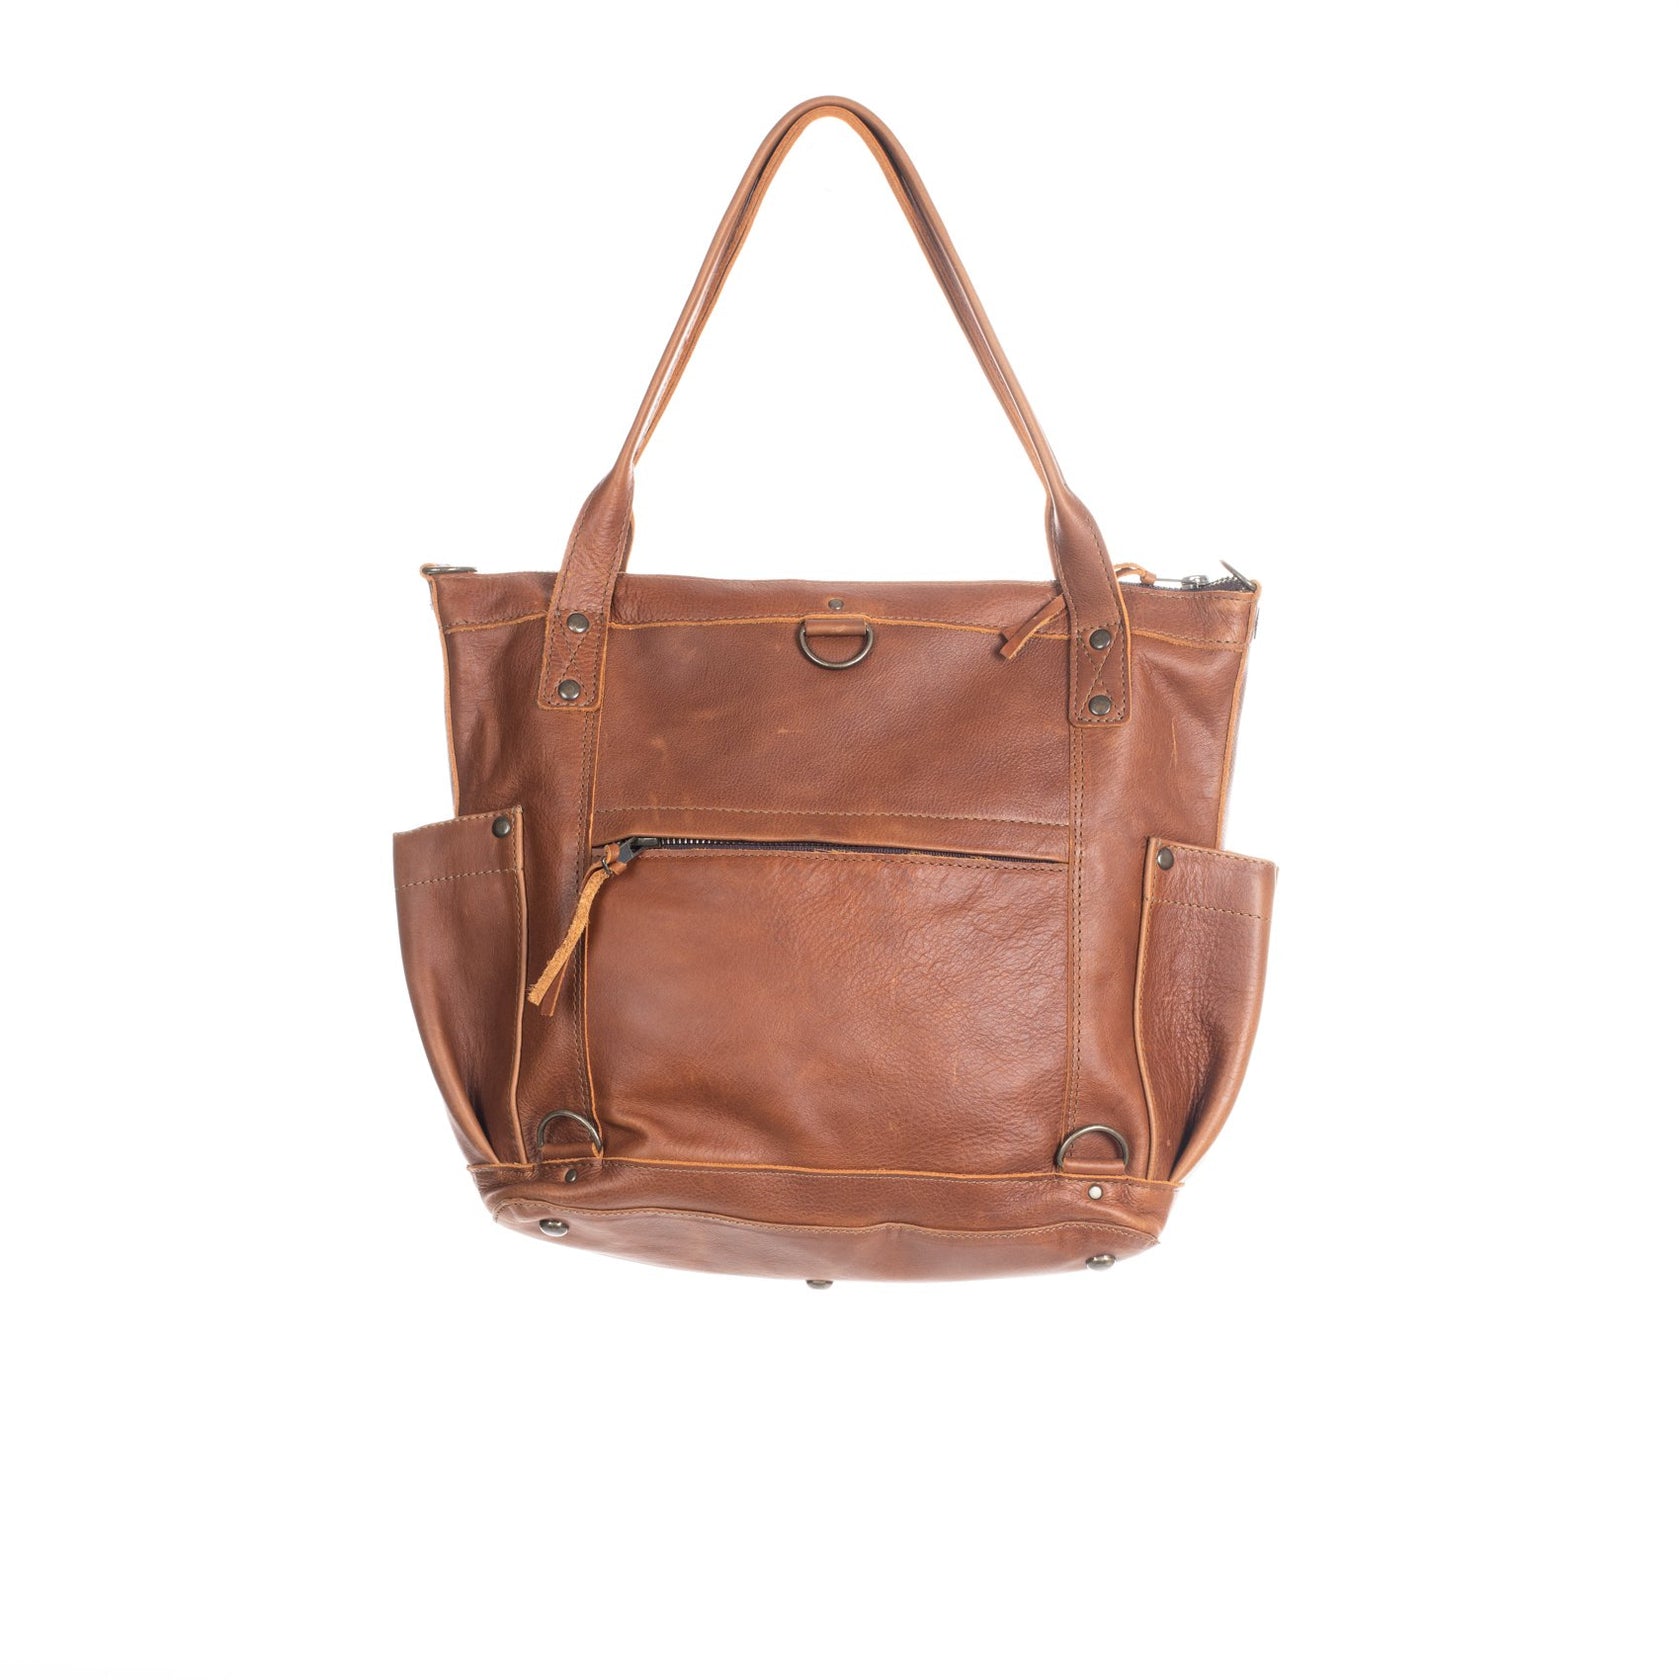 HERITAGE & SOCIETY - CIELO - THE PERFECT BAG MEDIUM - CAFE LEATHER ...